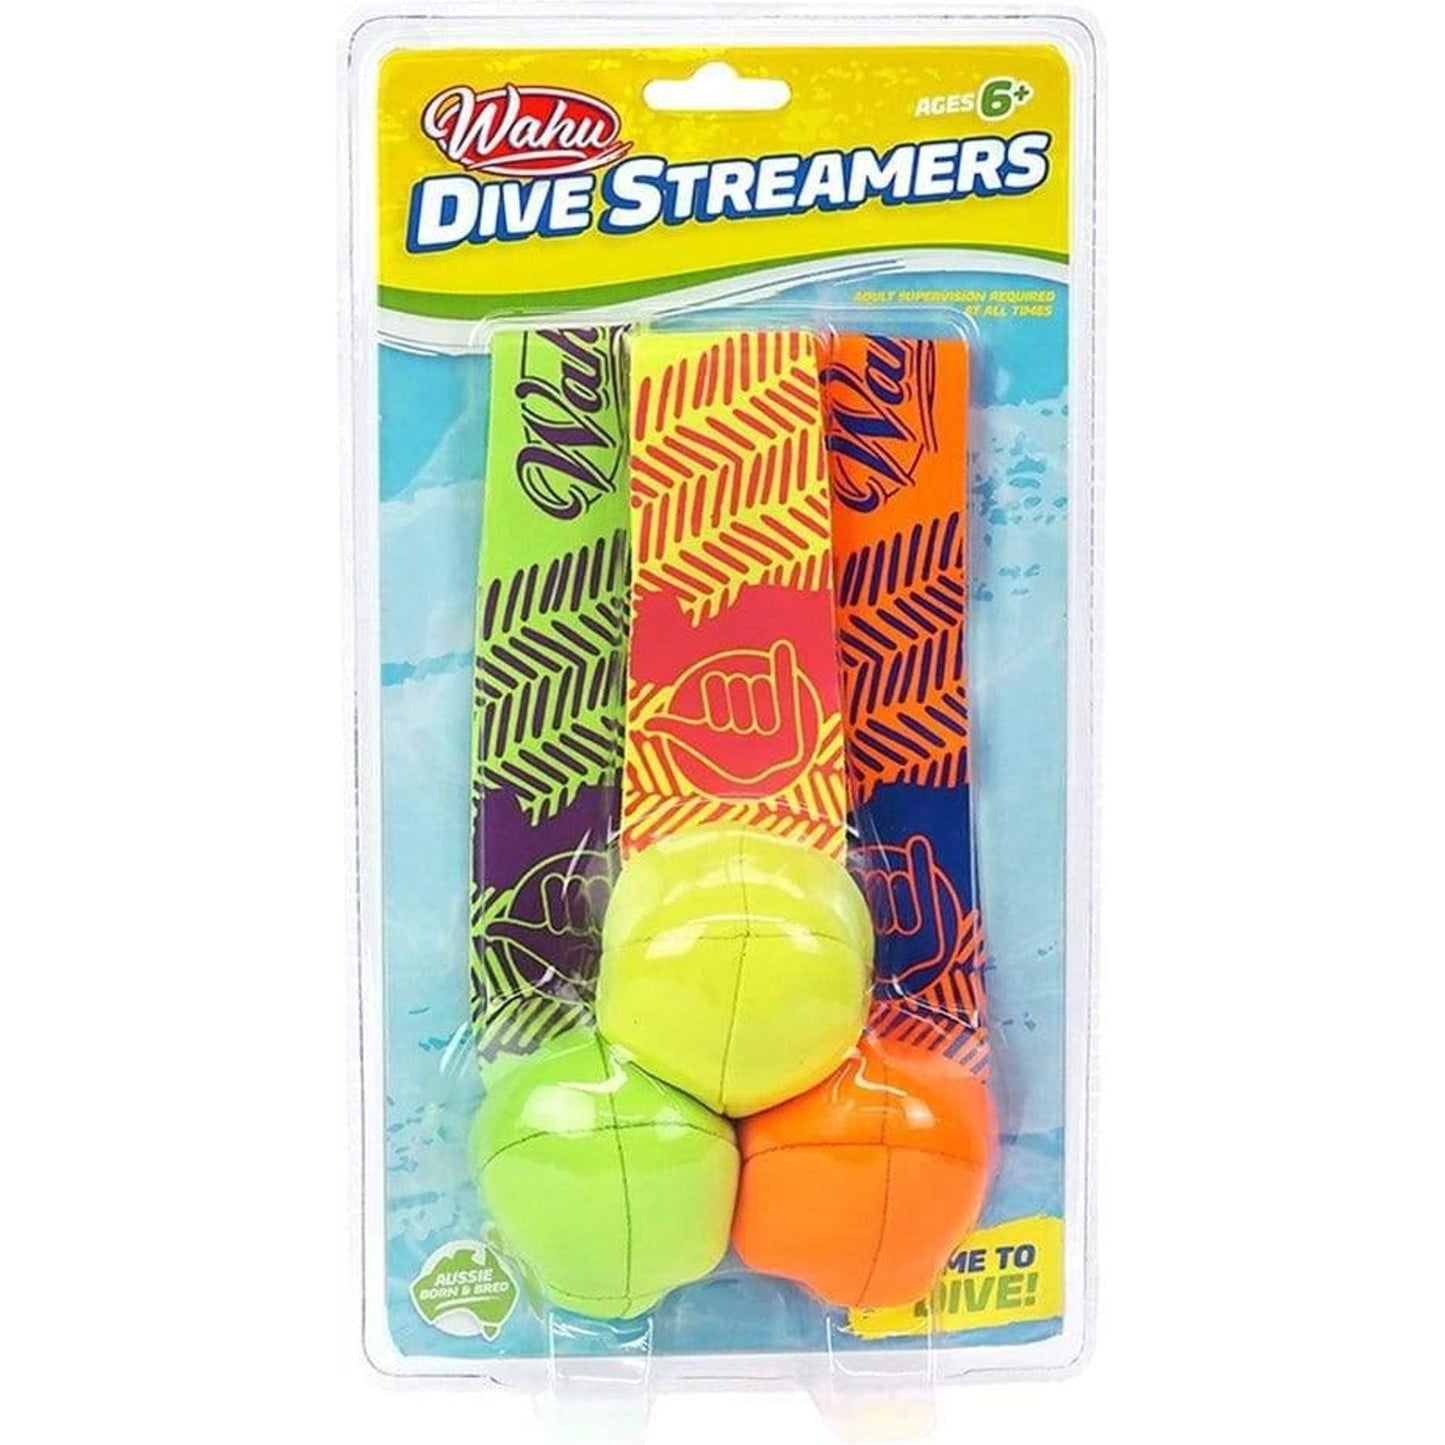 Wahu Dive Streamers  - Toybox Tales